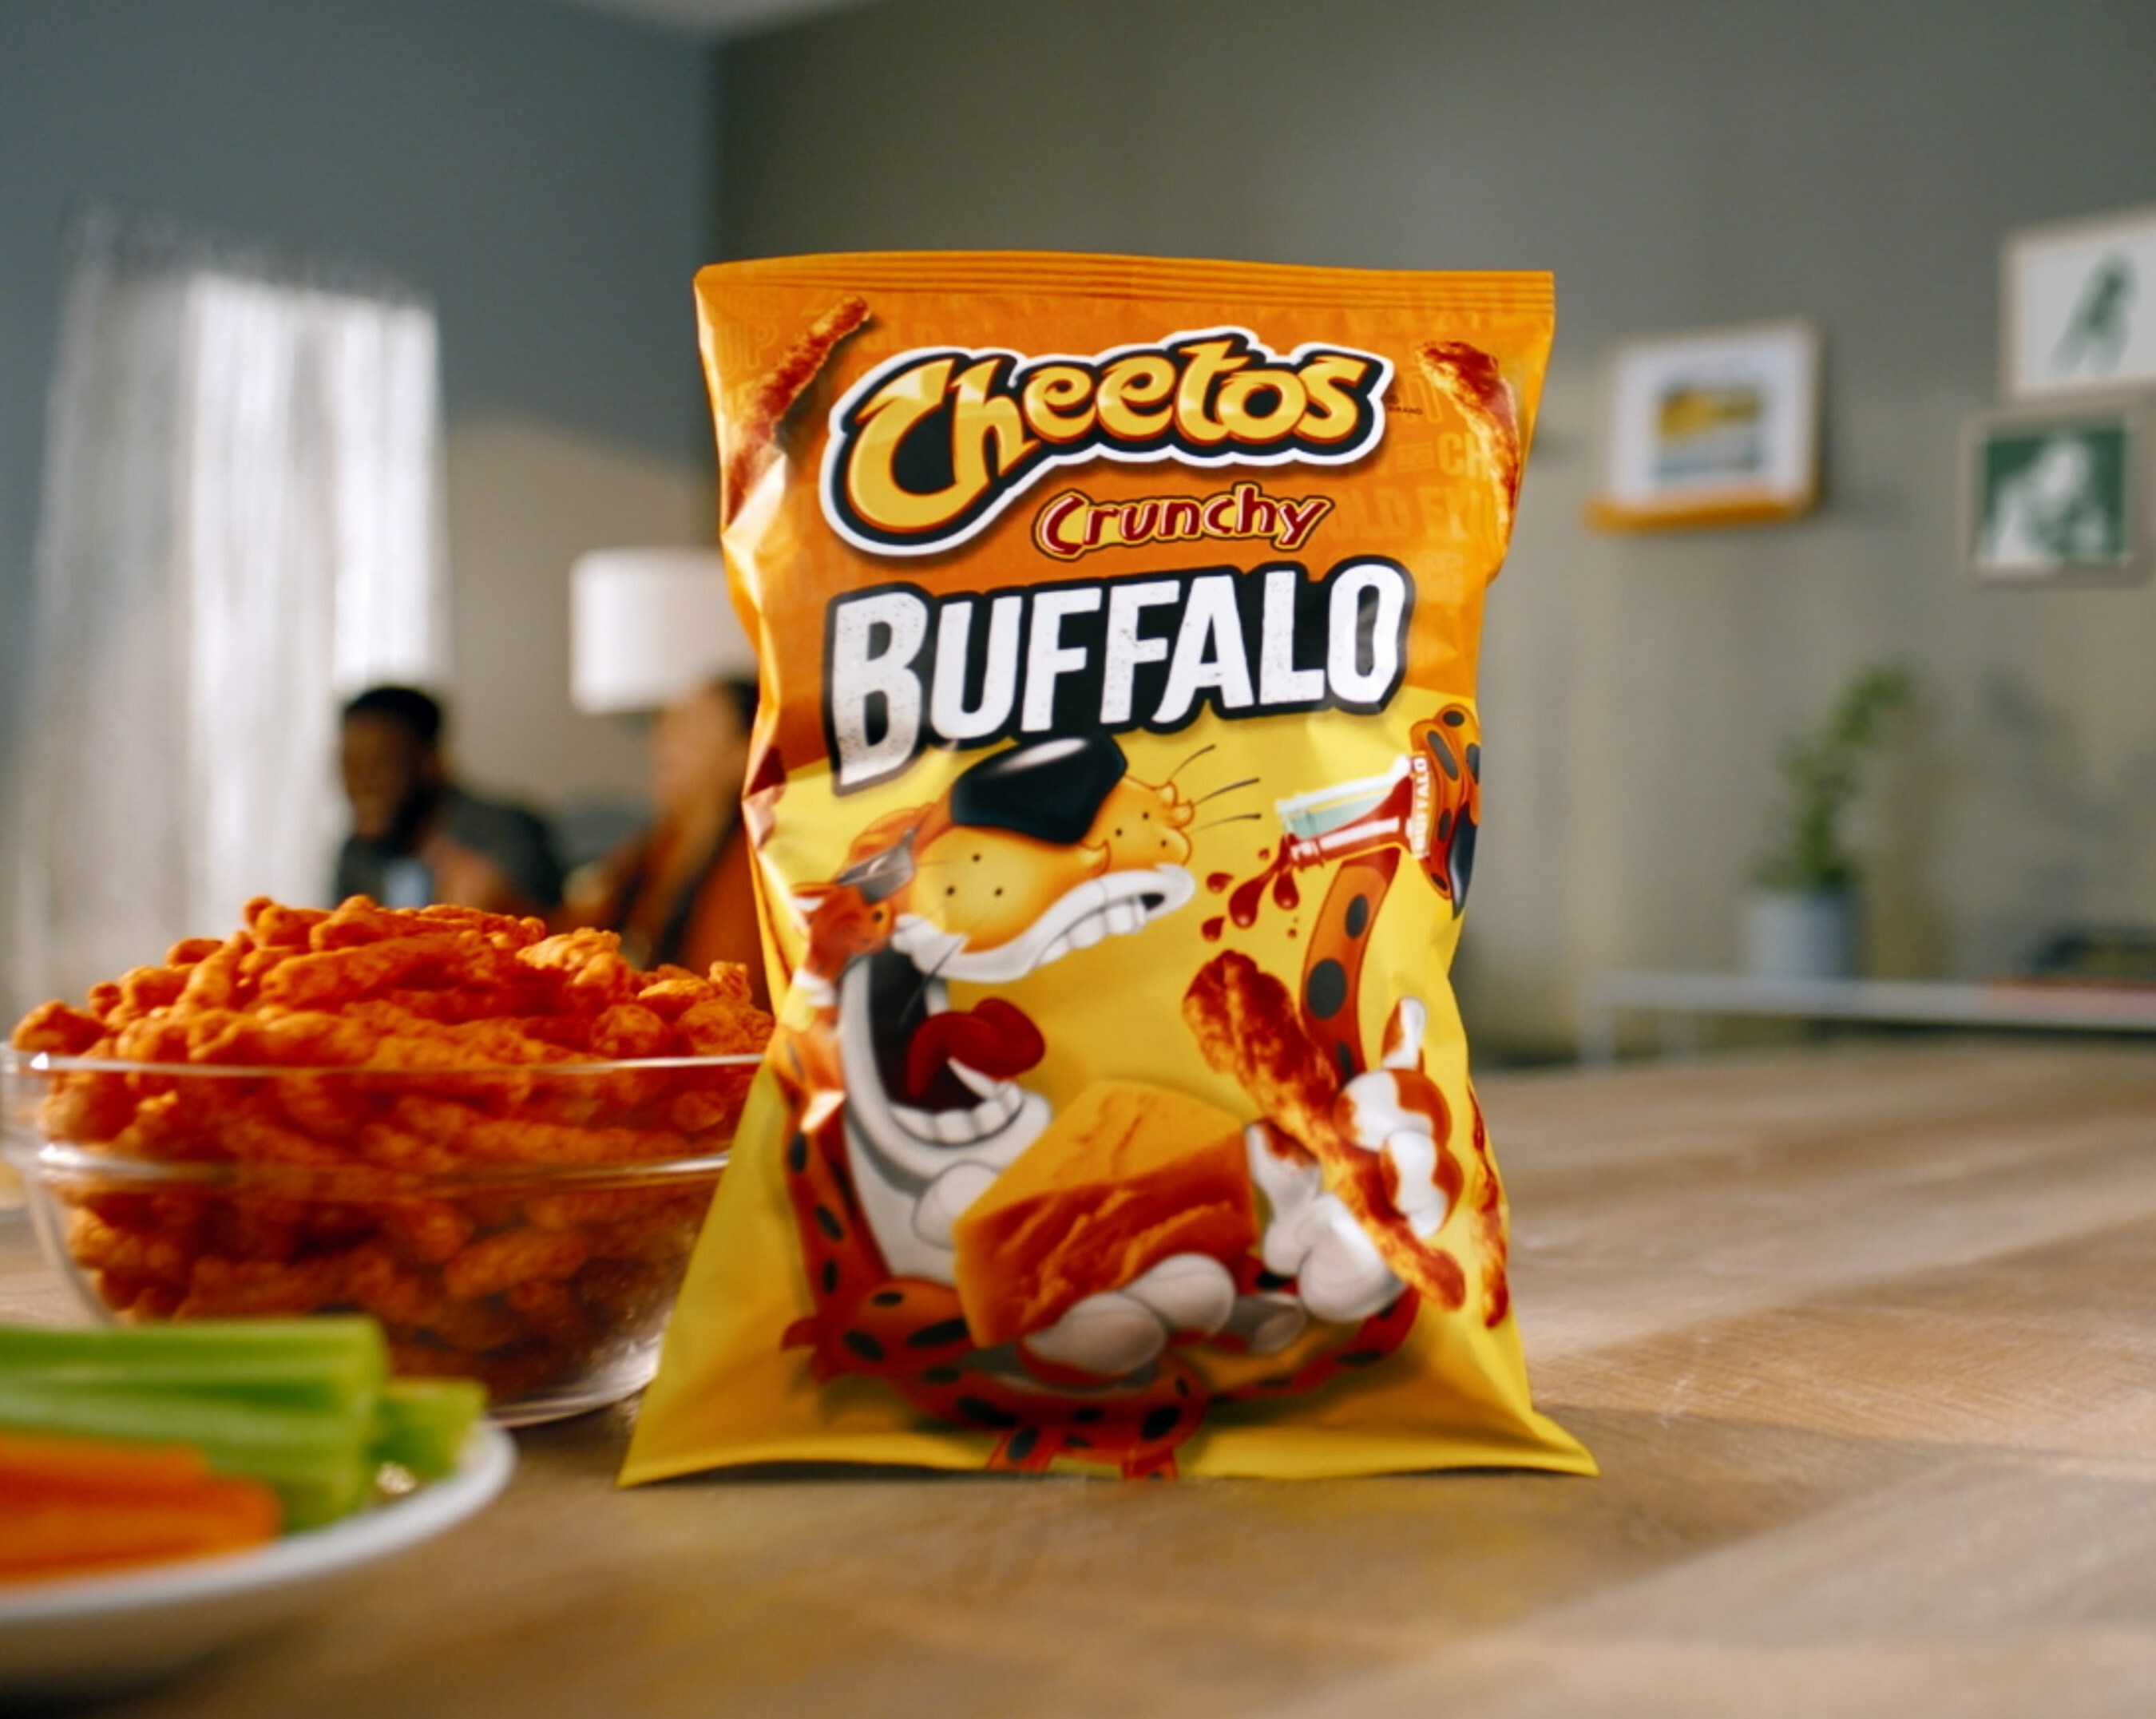 Frito-Lay is taking buffalo chicken dip to a new level with Cheetos Crunchy Buffalo, a permanent addition to the Cheetos lineup. (Photo by Frito-Lay)